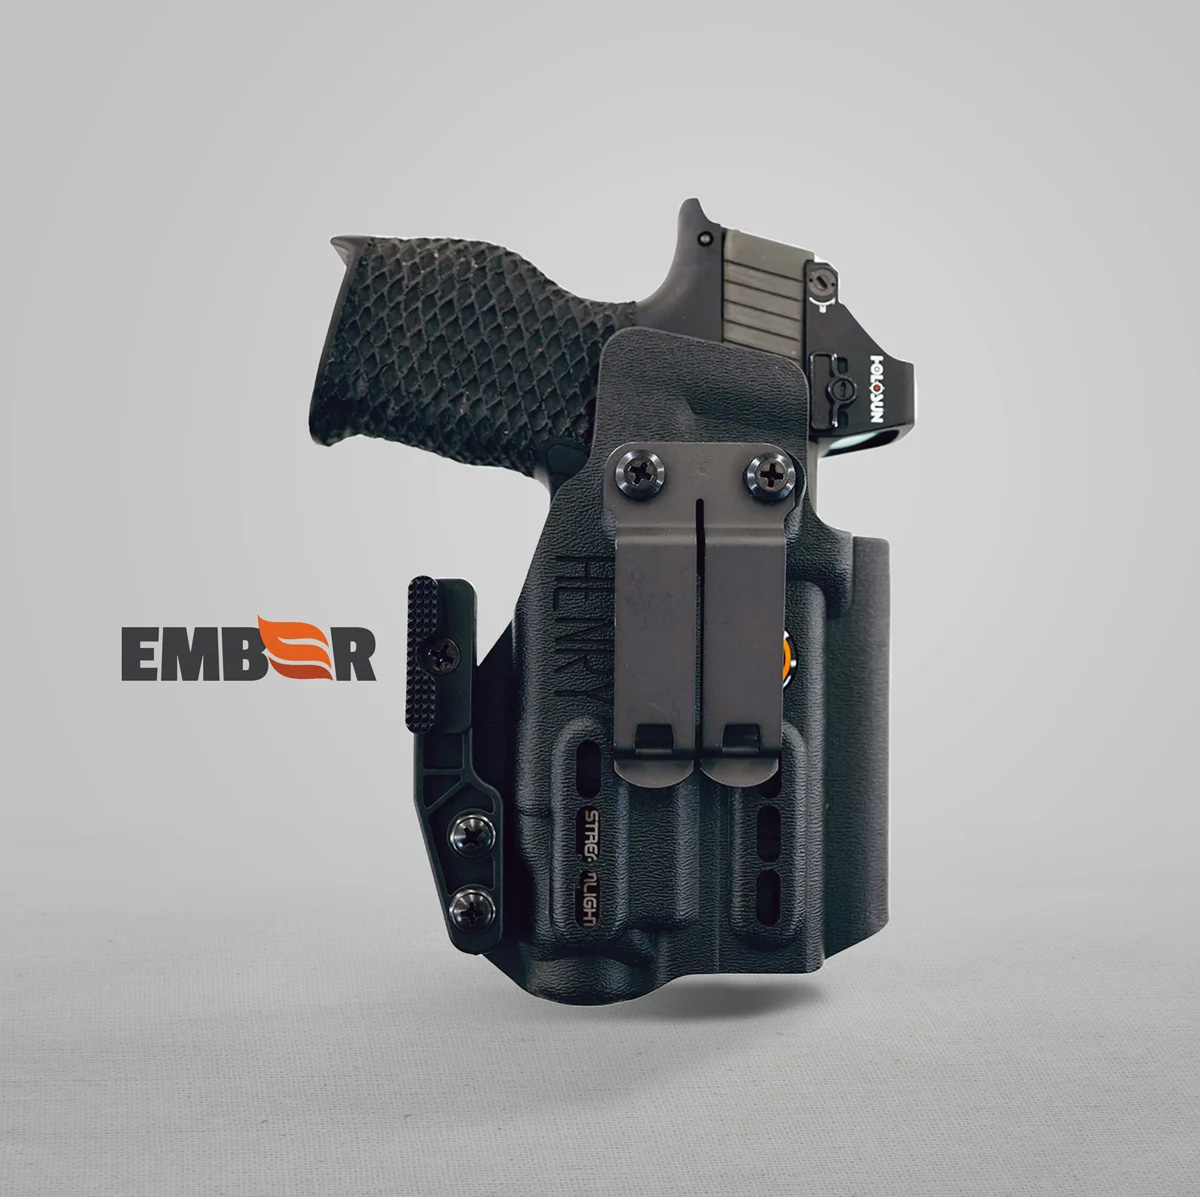 Ember - AIWB/IWB Light bearing holster for sub-compact concealed